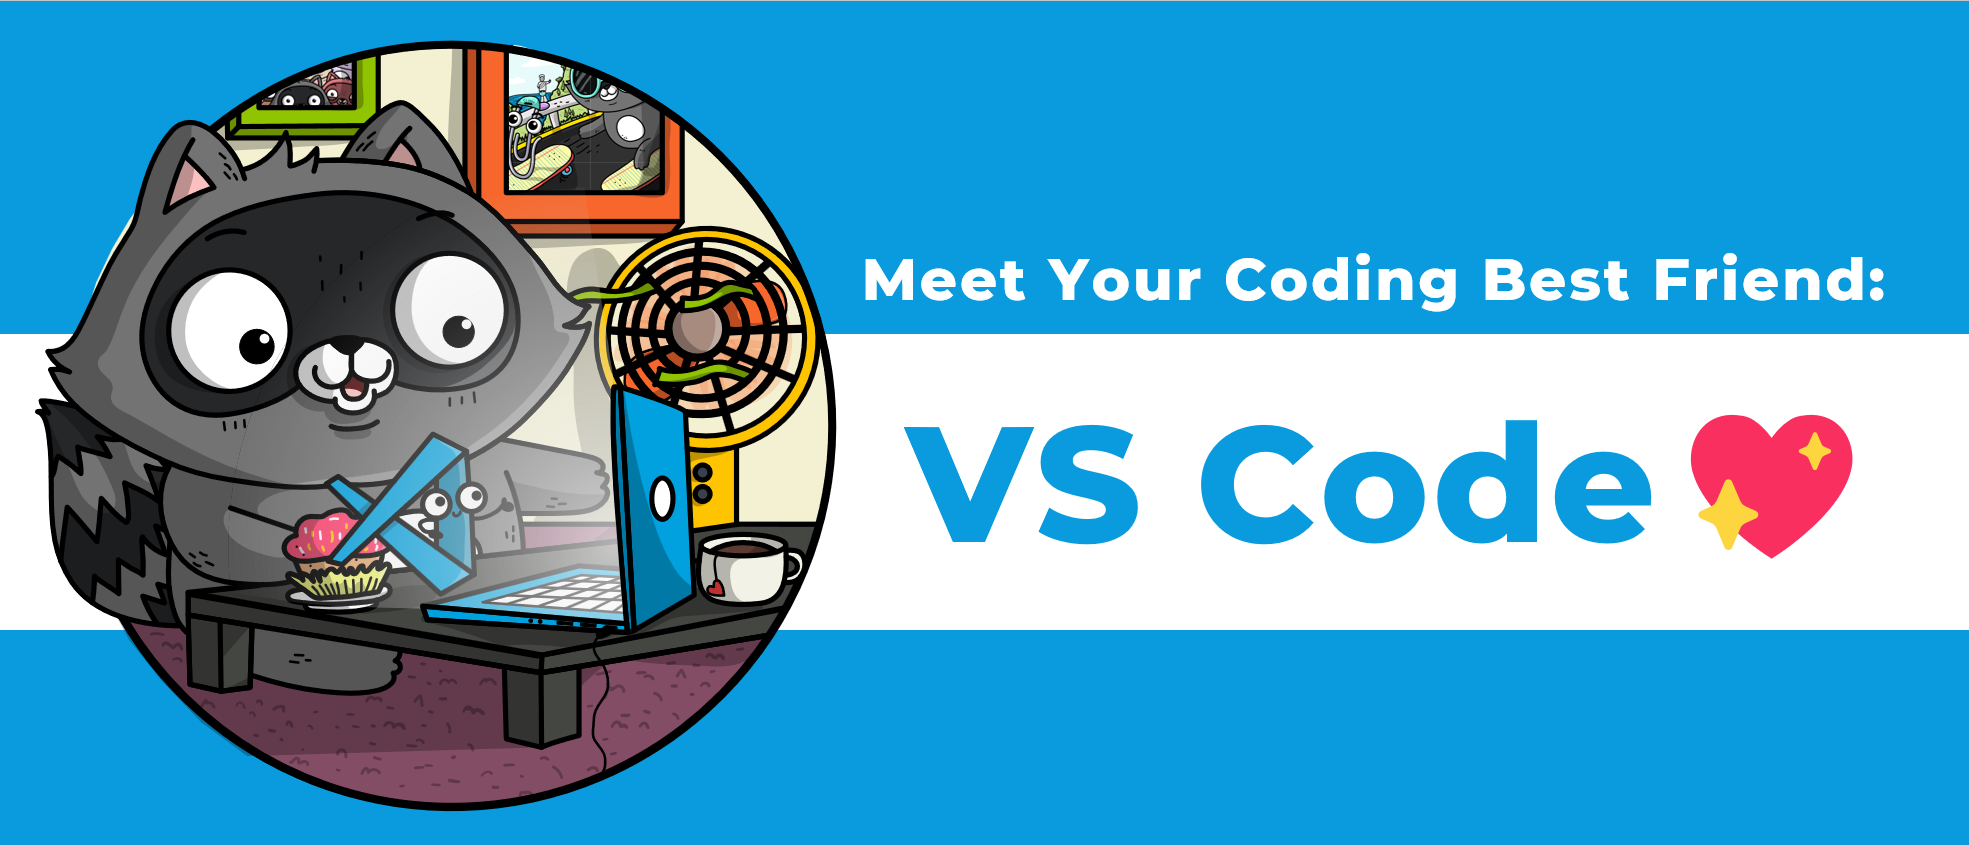 Raccon mascot bit in a header image working on a laptop with the title: Meet your coding best friend: VS Code💖